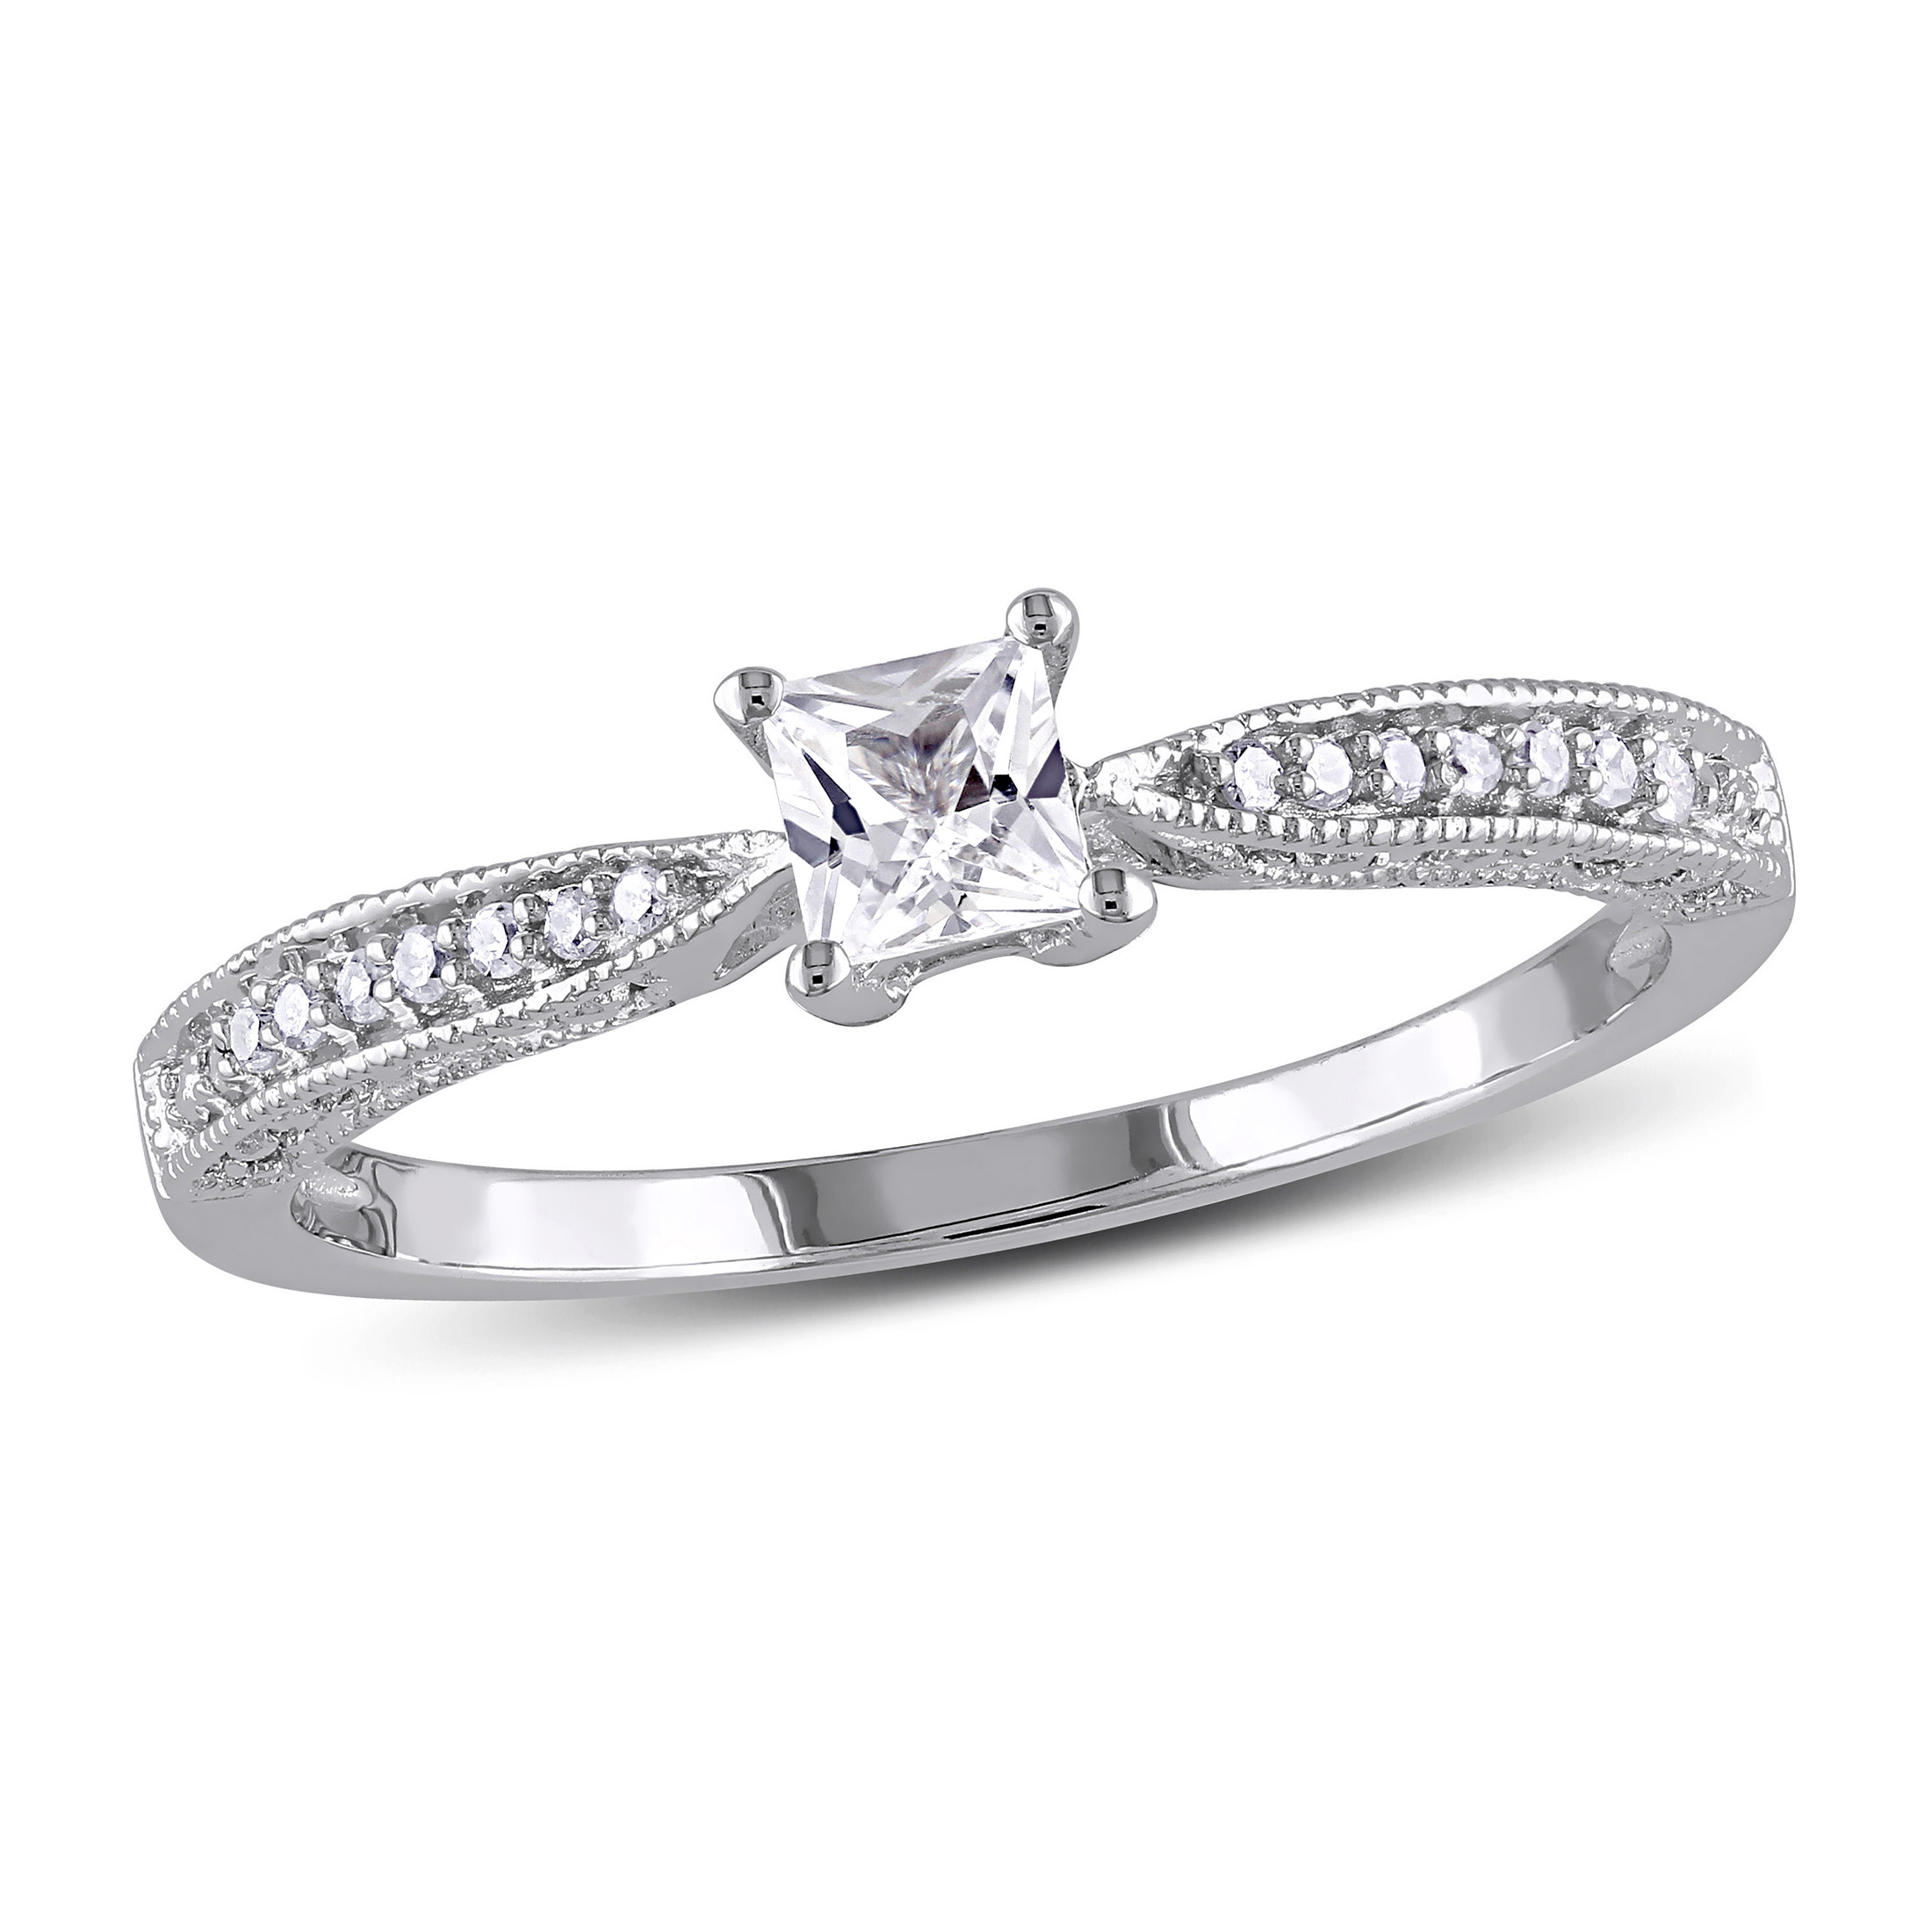 Everly Women's Engagement Anniversary Bridal 1/3 CT T.G.W. Square-Cut Created White Sapphire Round-Cut Diamond Accent (G-H, I2-I3) Sterling Silver Sky Tip Shank Ring with 4 Prong/Claw/Pave Setting - image 1 of 7